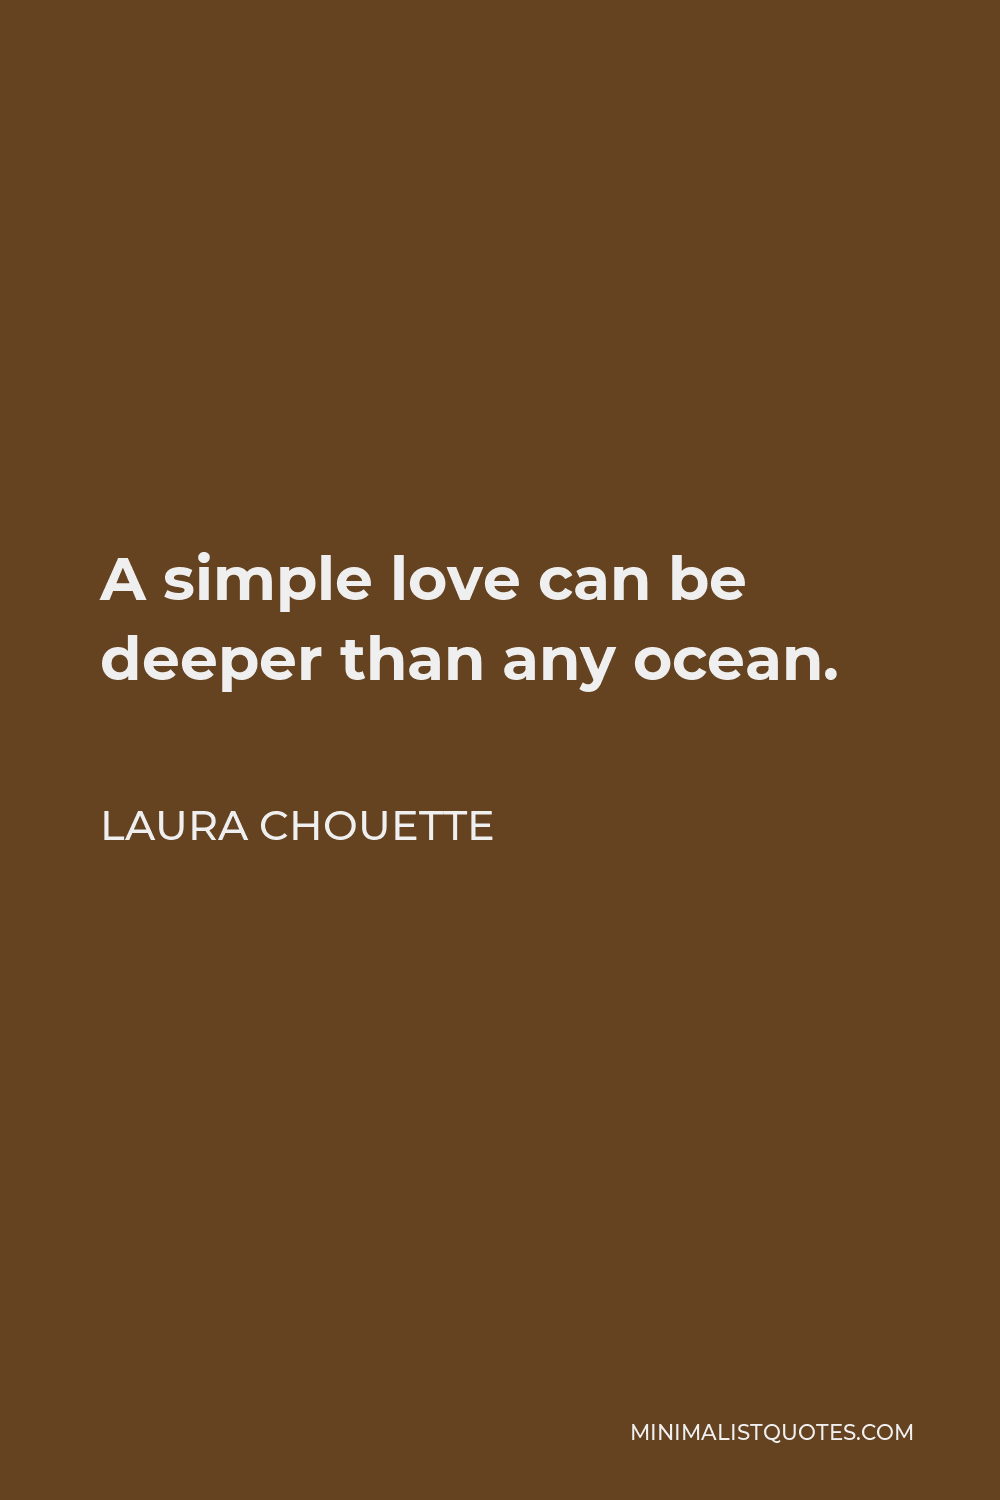 Laura Chouette Quote - A simple love can be deeper than any ocean.